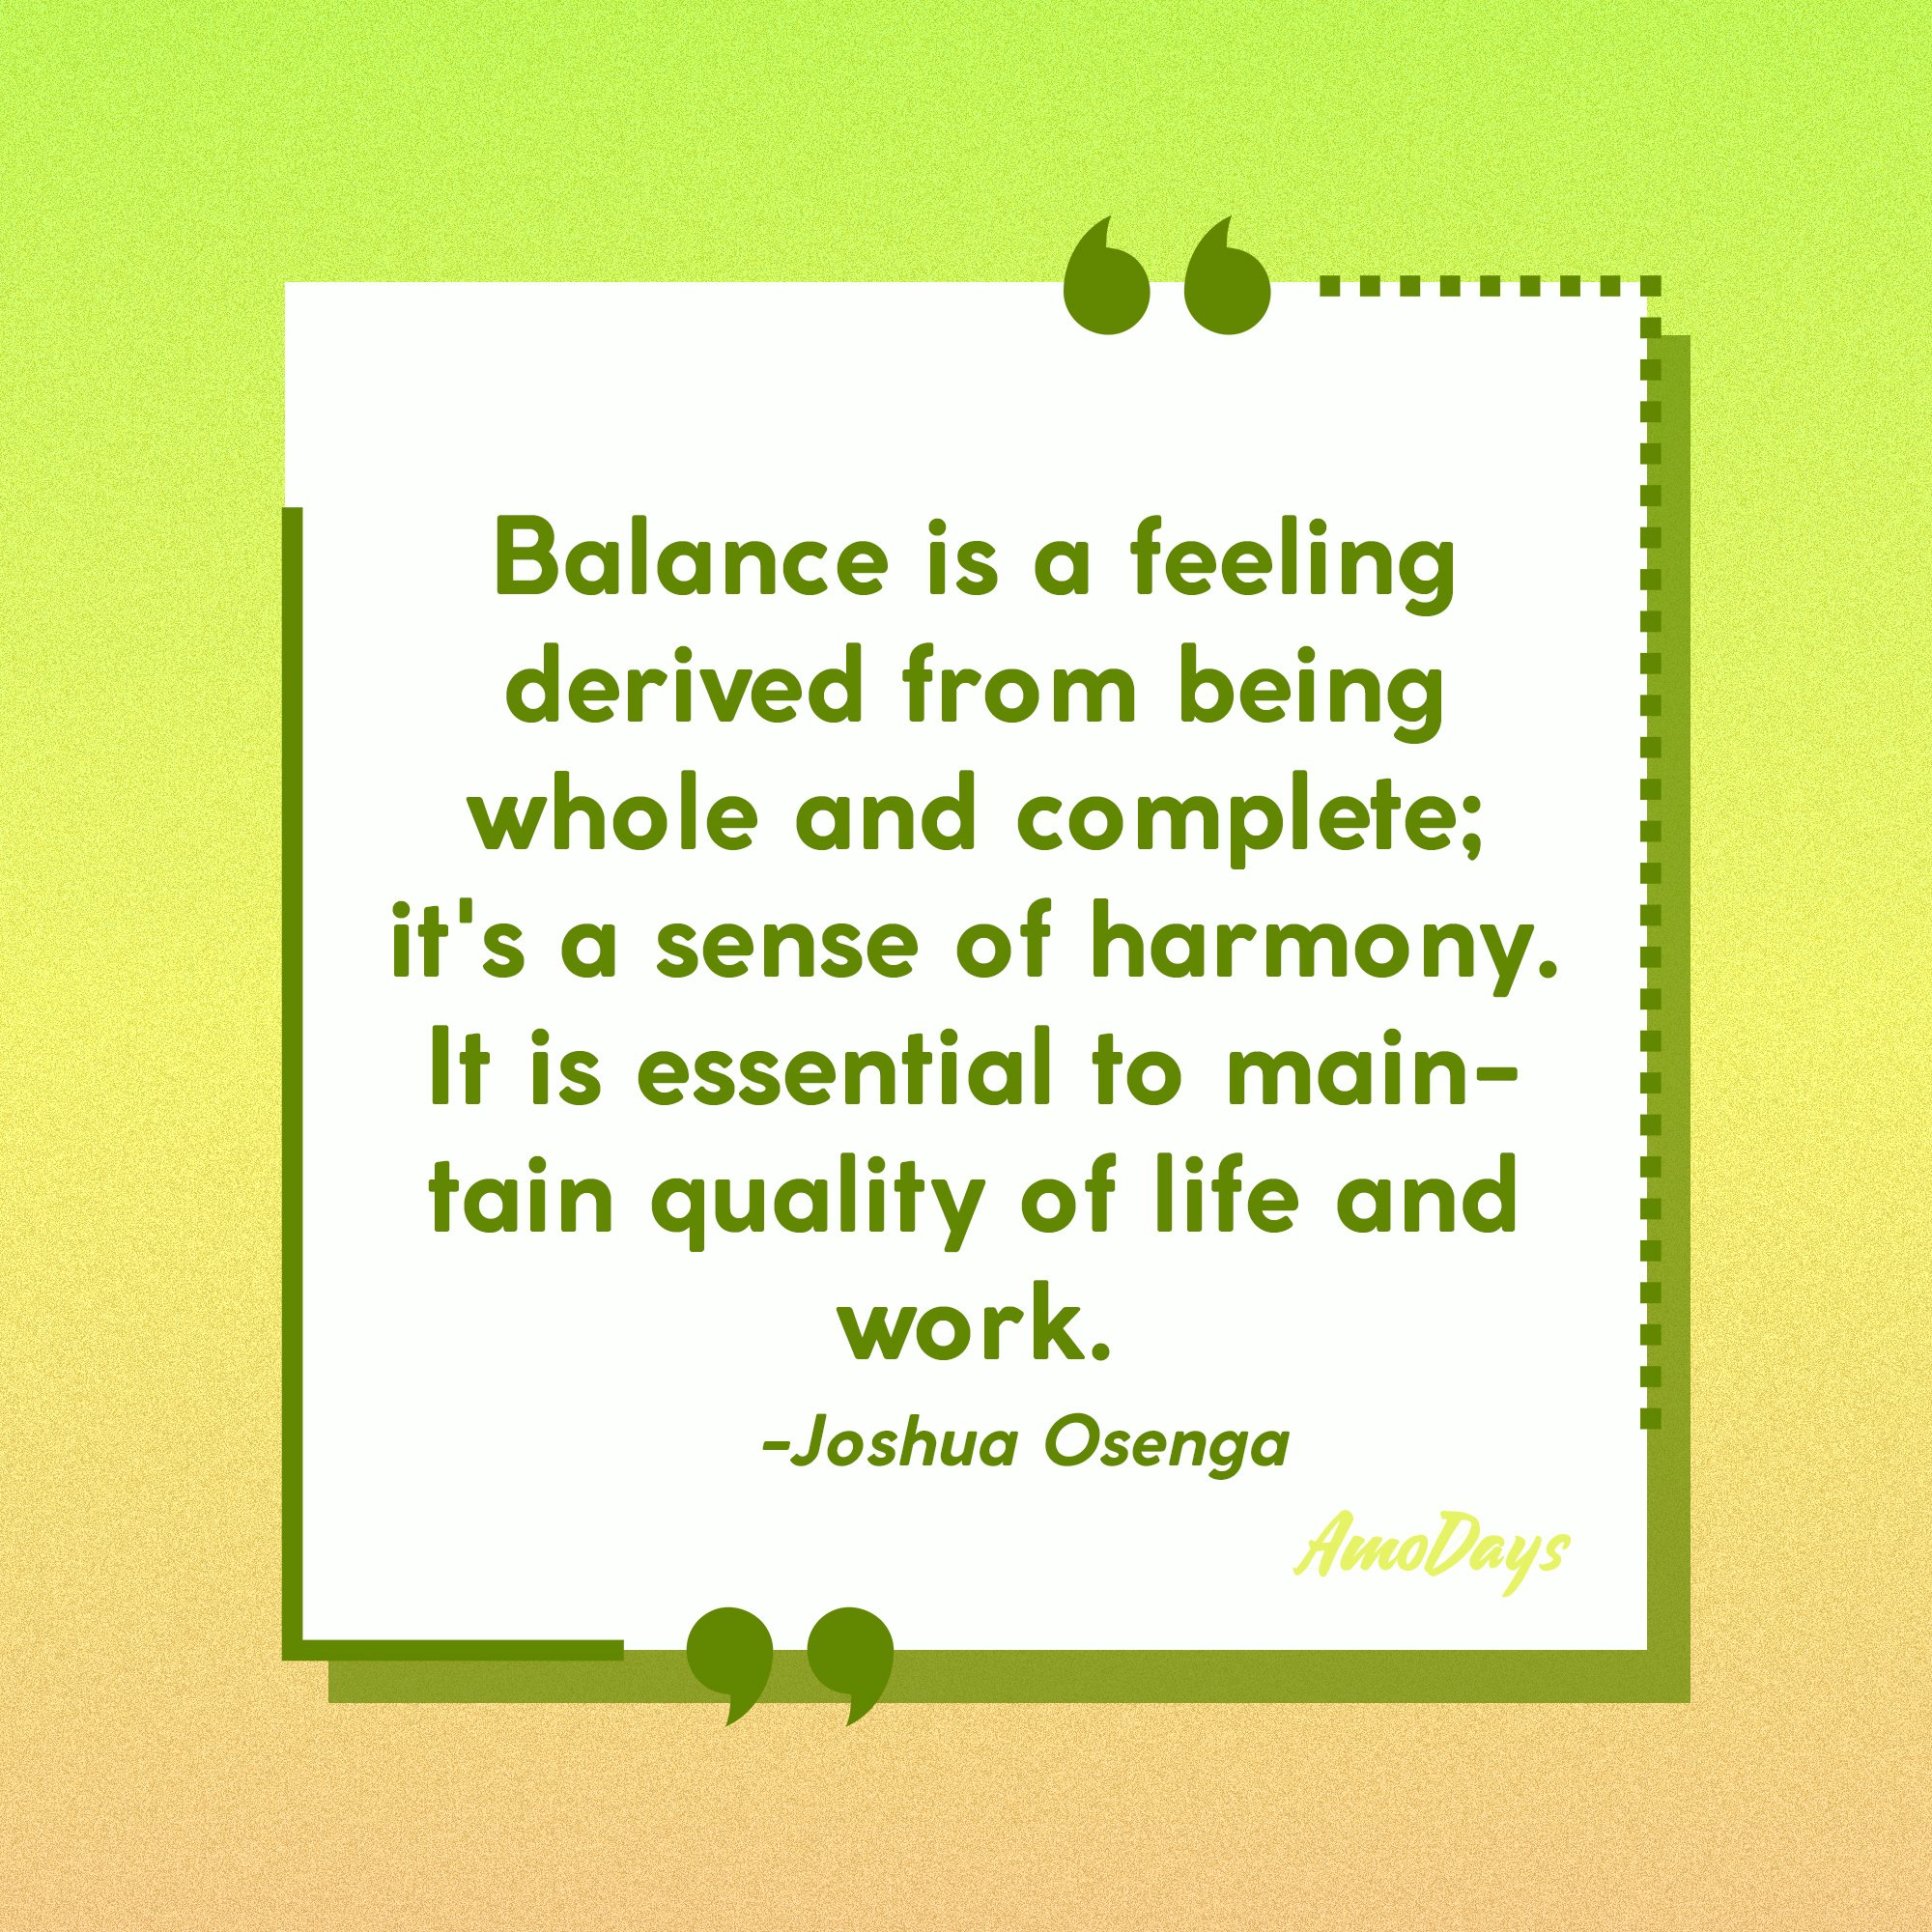 Joshua Osenga's quote: "Balance is a feeling derived from being whole and complete; it's a sense of harmony. It is essential to maintain quality of life and work." | Image: Amodays